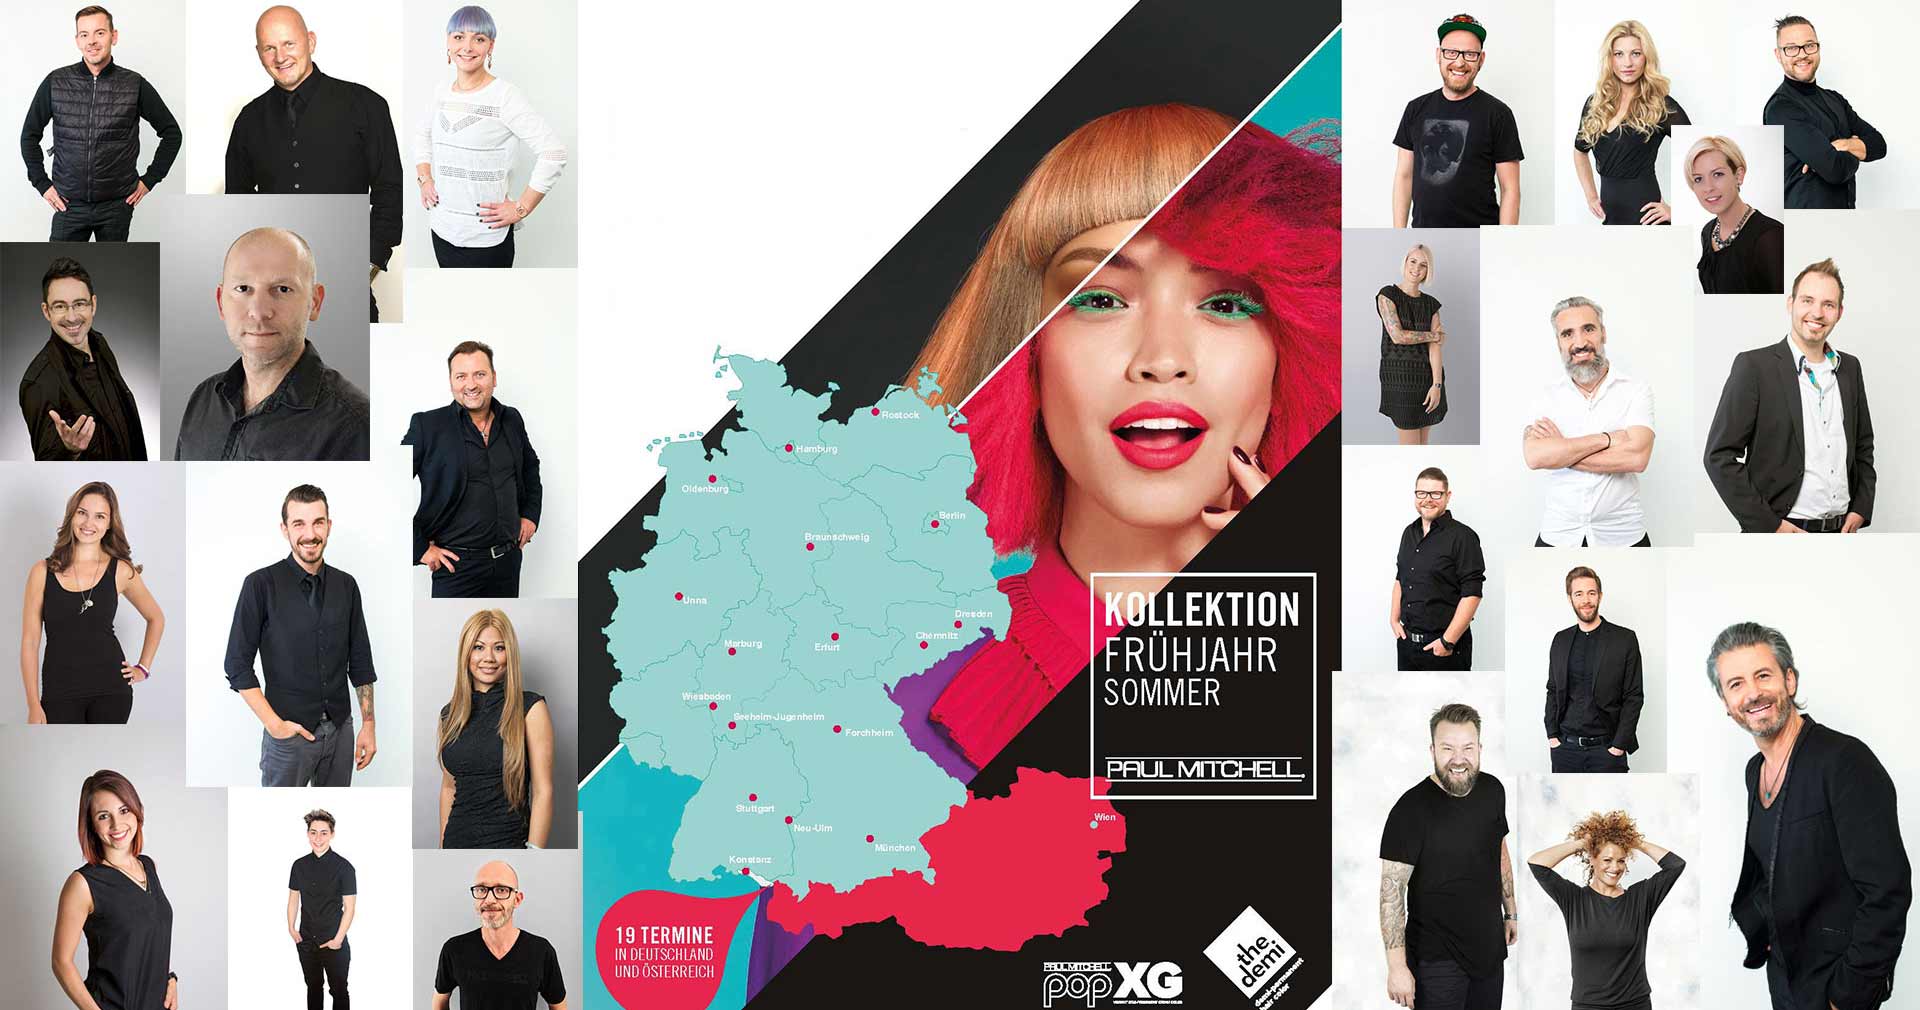 You-are-invited-Paul-Mitchell-Kollektions-Roadshow-FruehjahrSommer-2017-1609-1